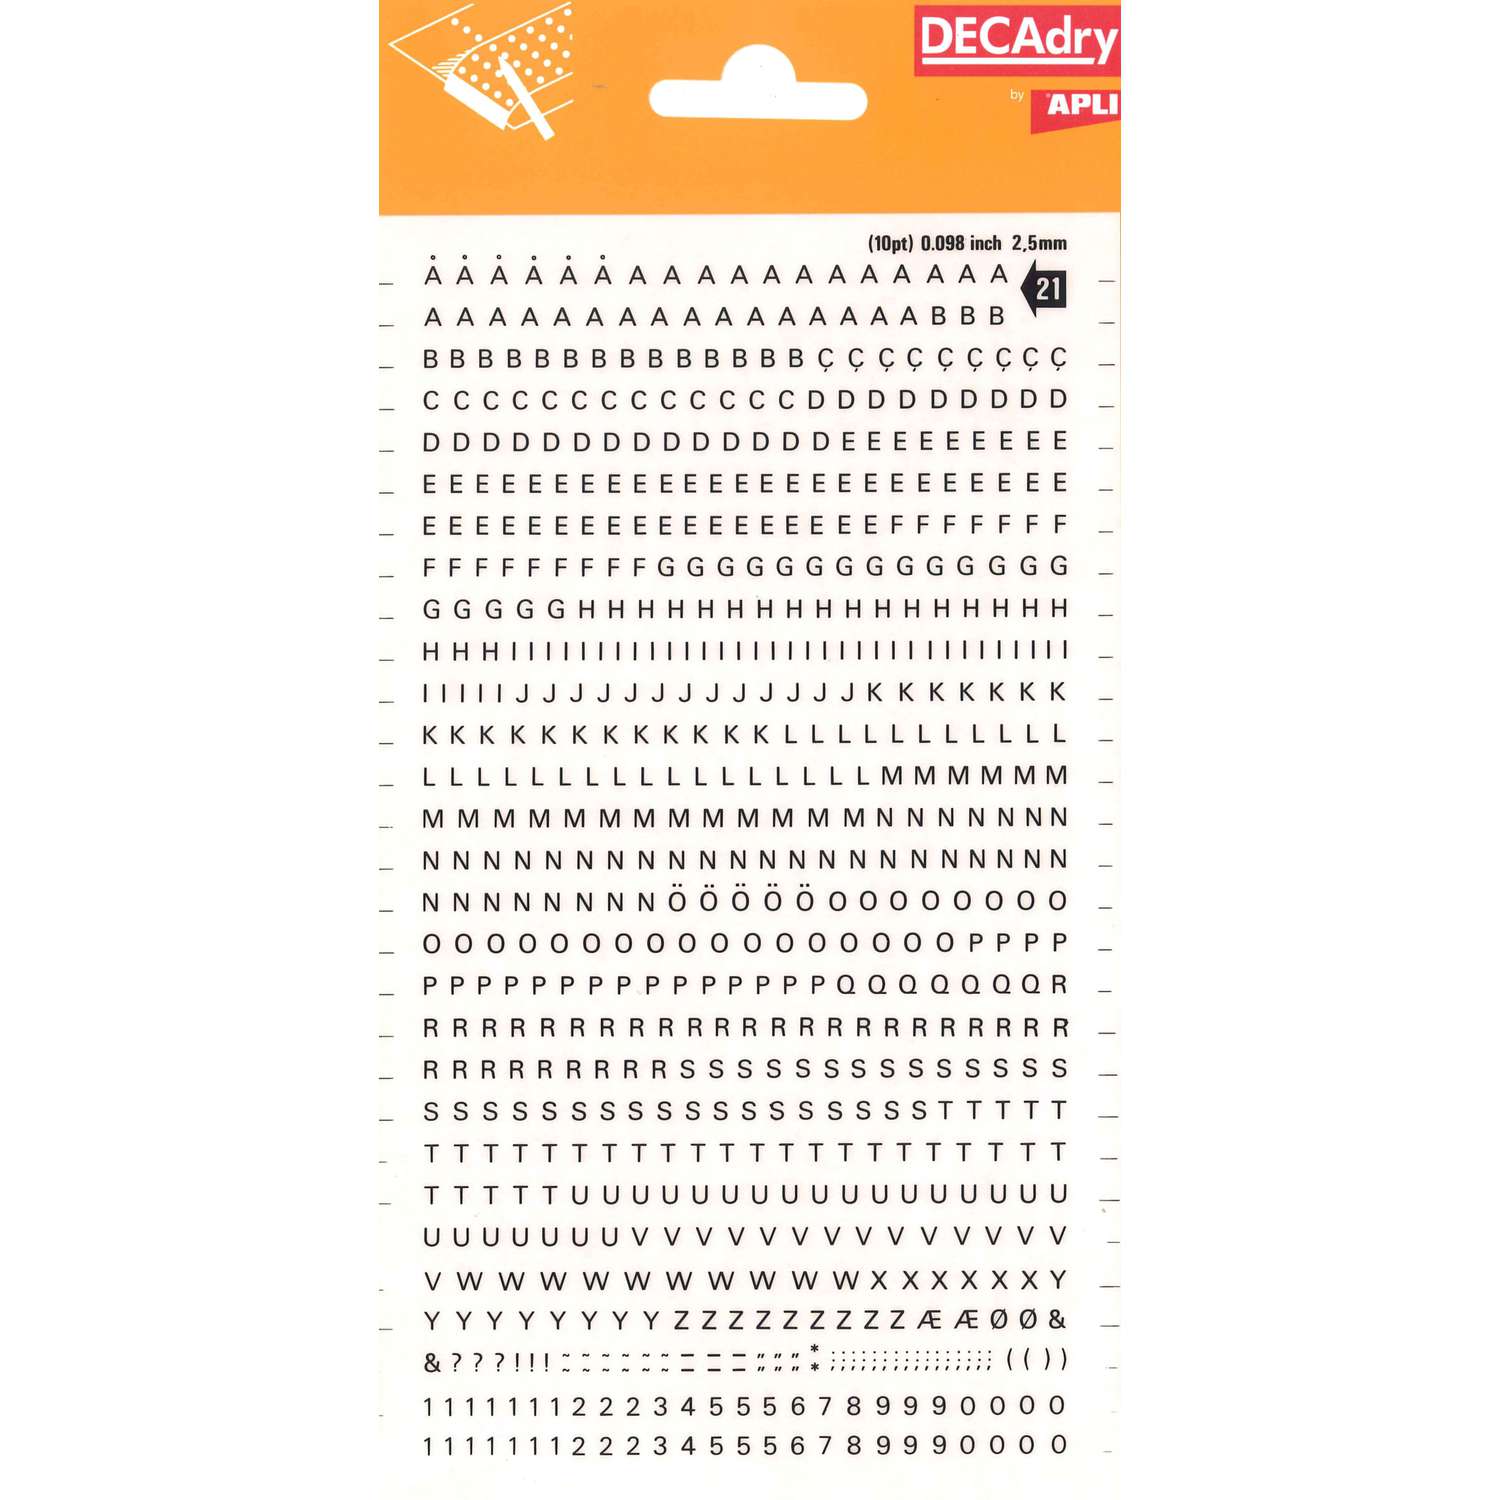 2 sheets KALKITOS transferable decadry 31-10 mm letters 